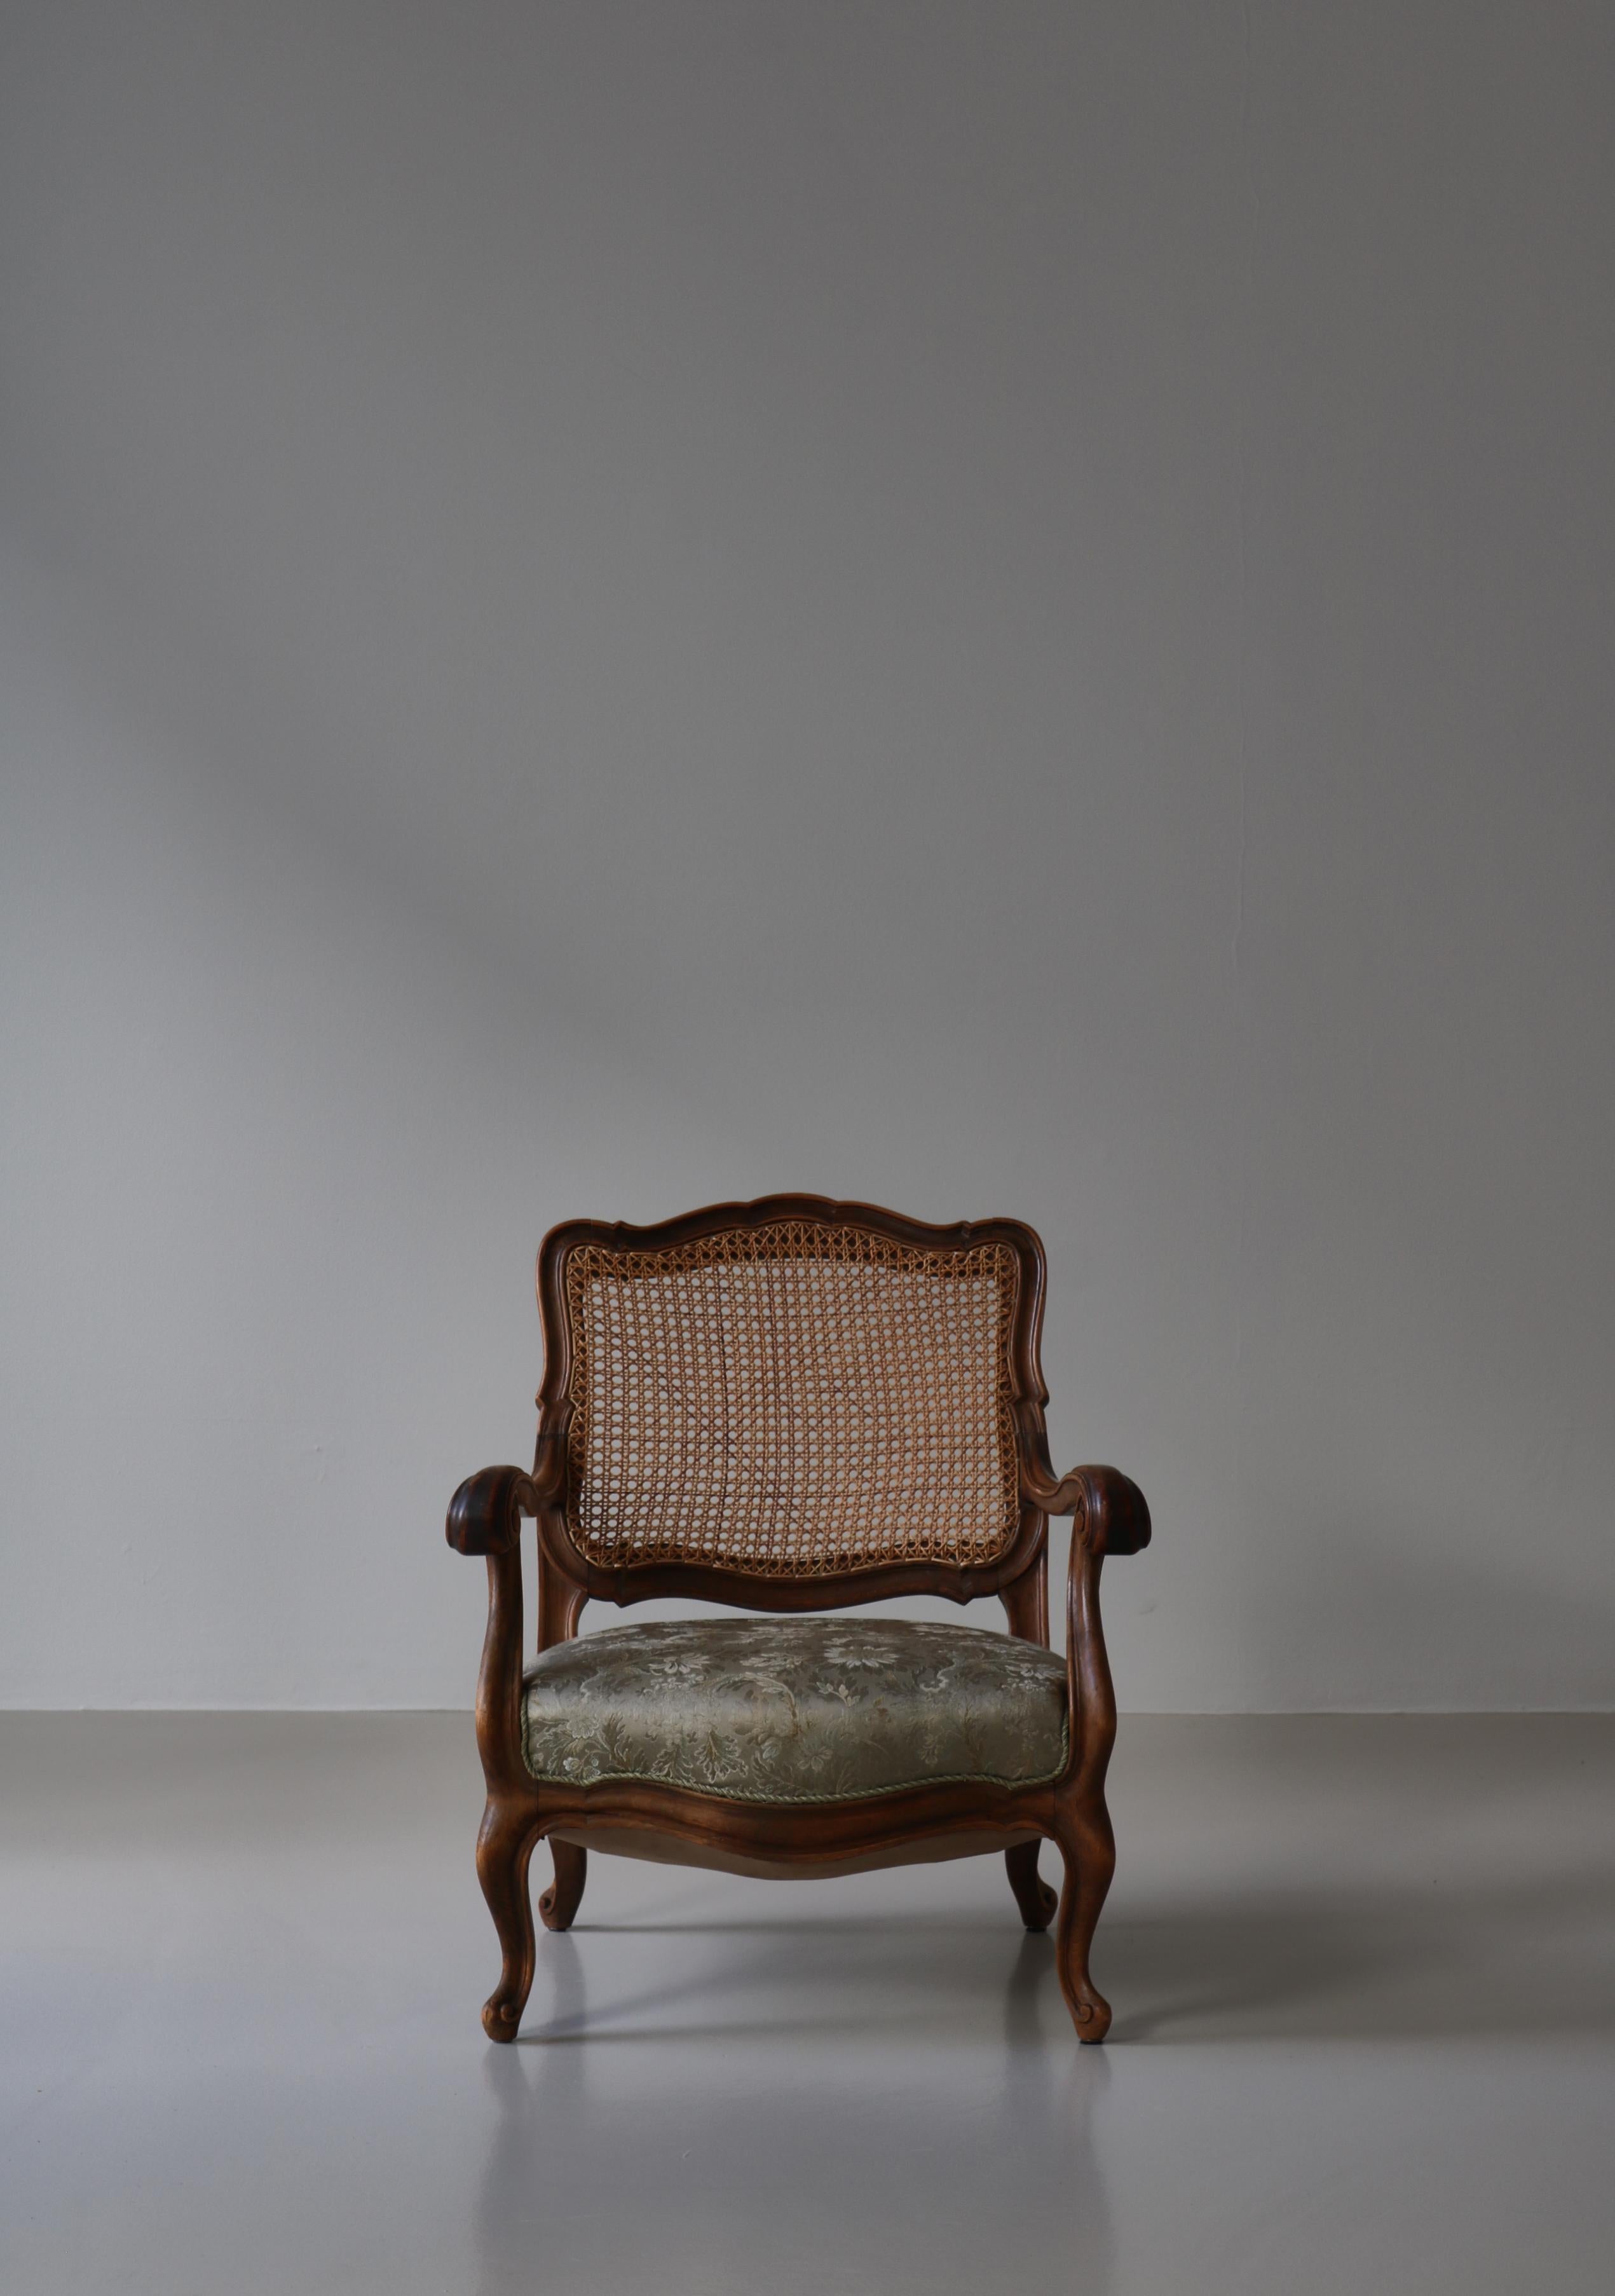 Bergére Chair Rococo Revival by Danish Cabinetmaker, Early 20th Century For Sale 1